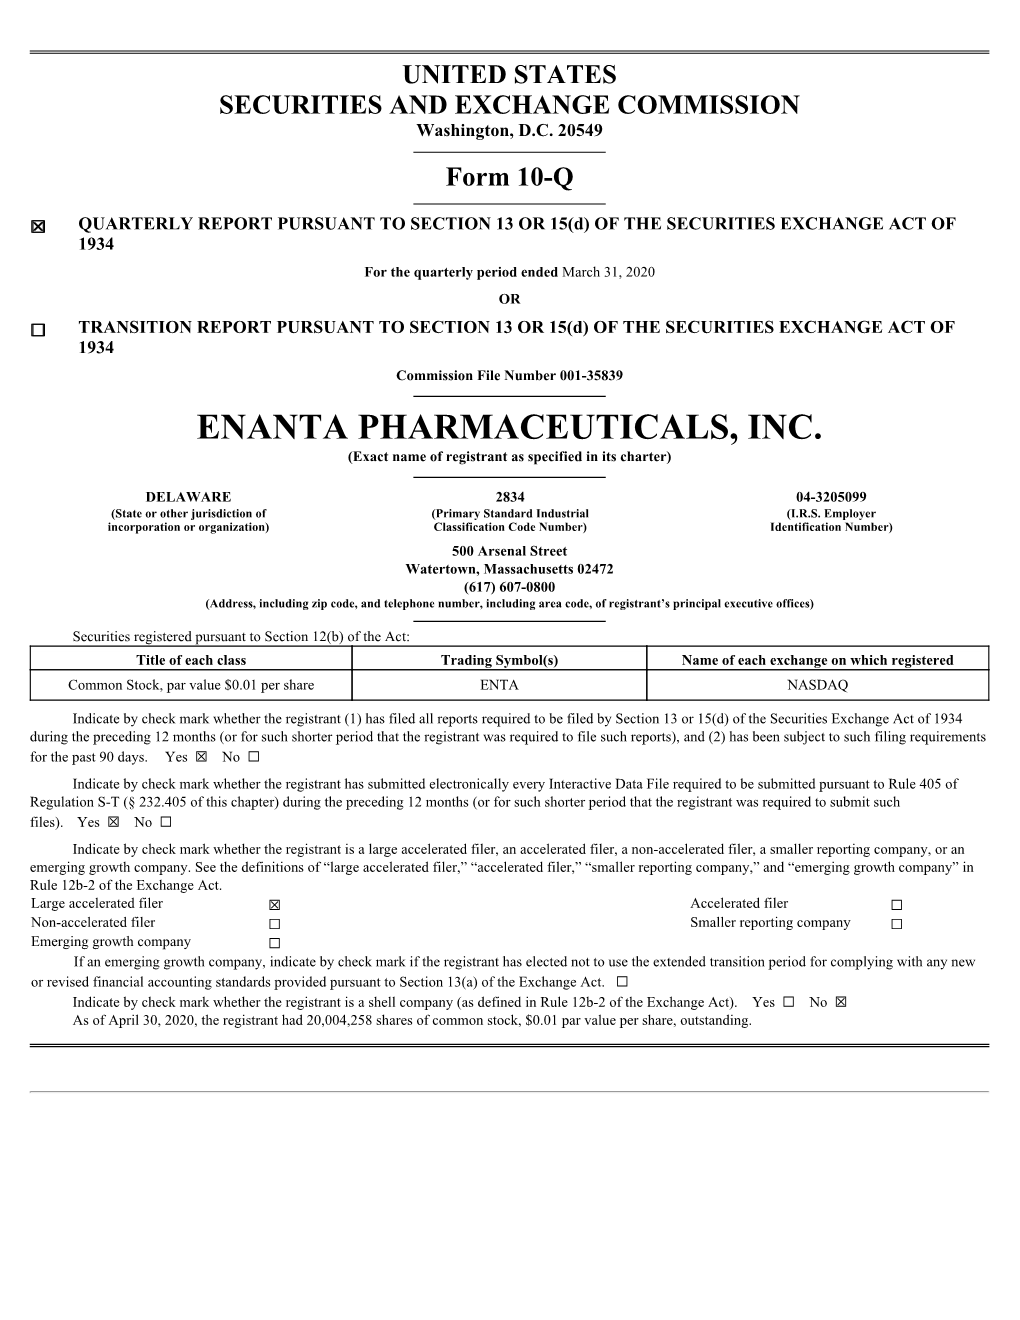 ENANTA PHARMACEUTICALS, INC. (Exact Name of Registrant As Specified in Its Charter)